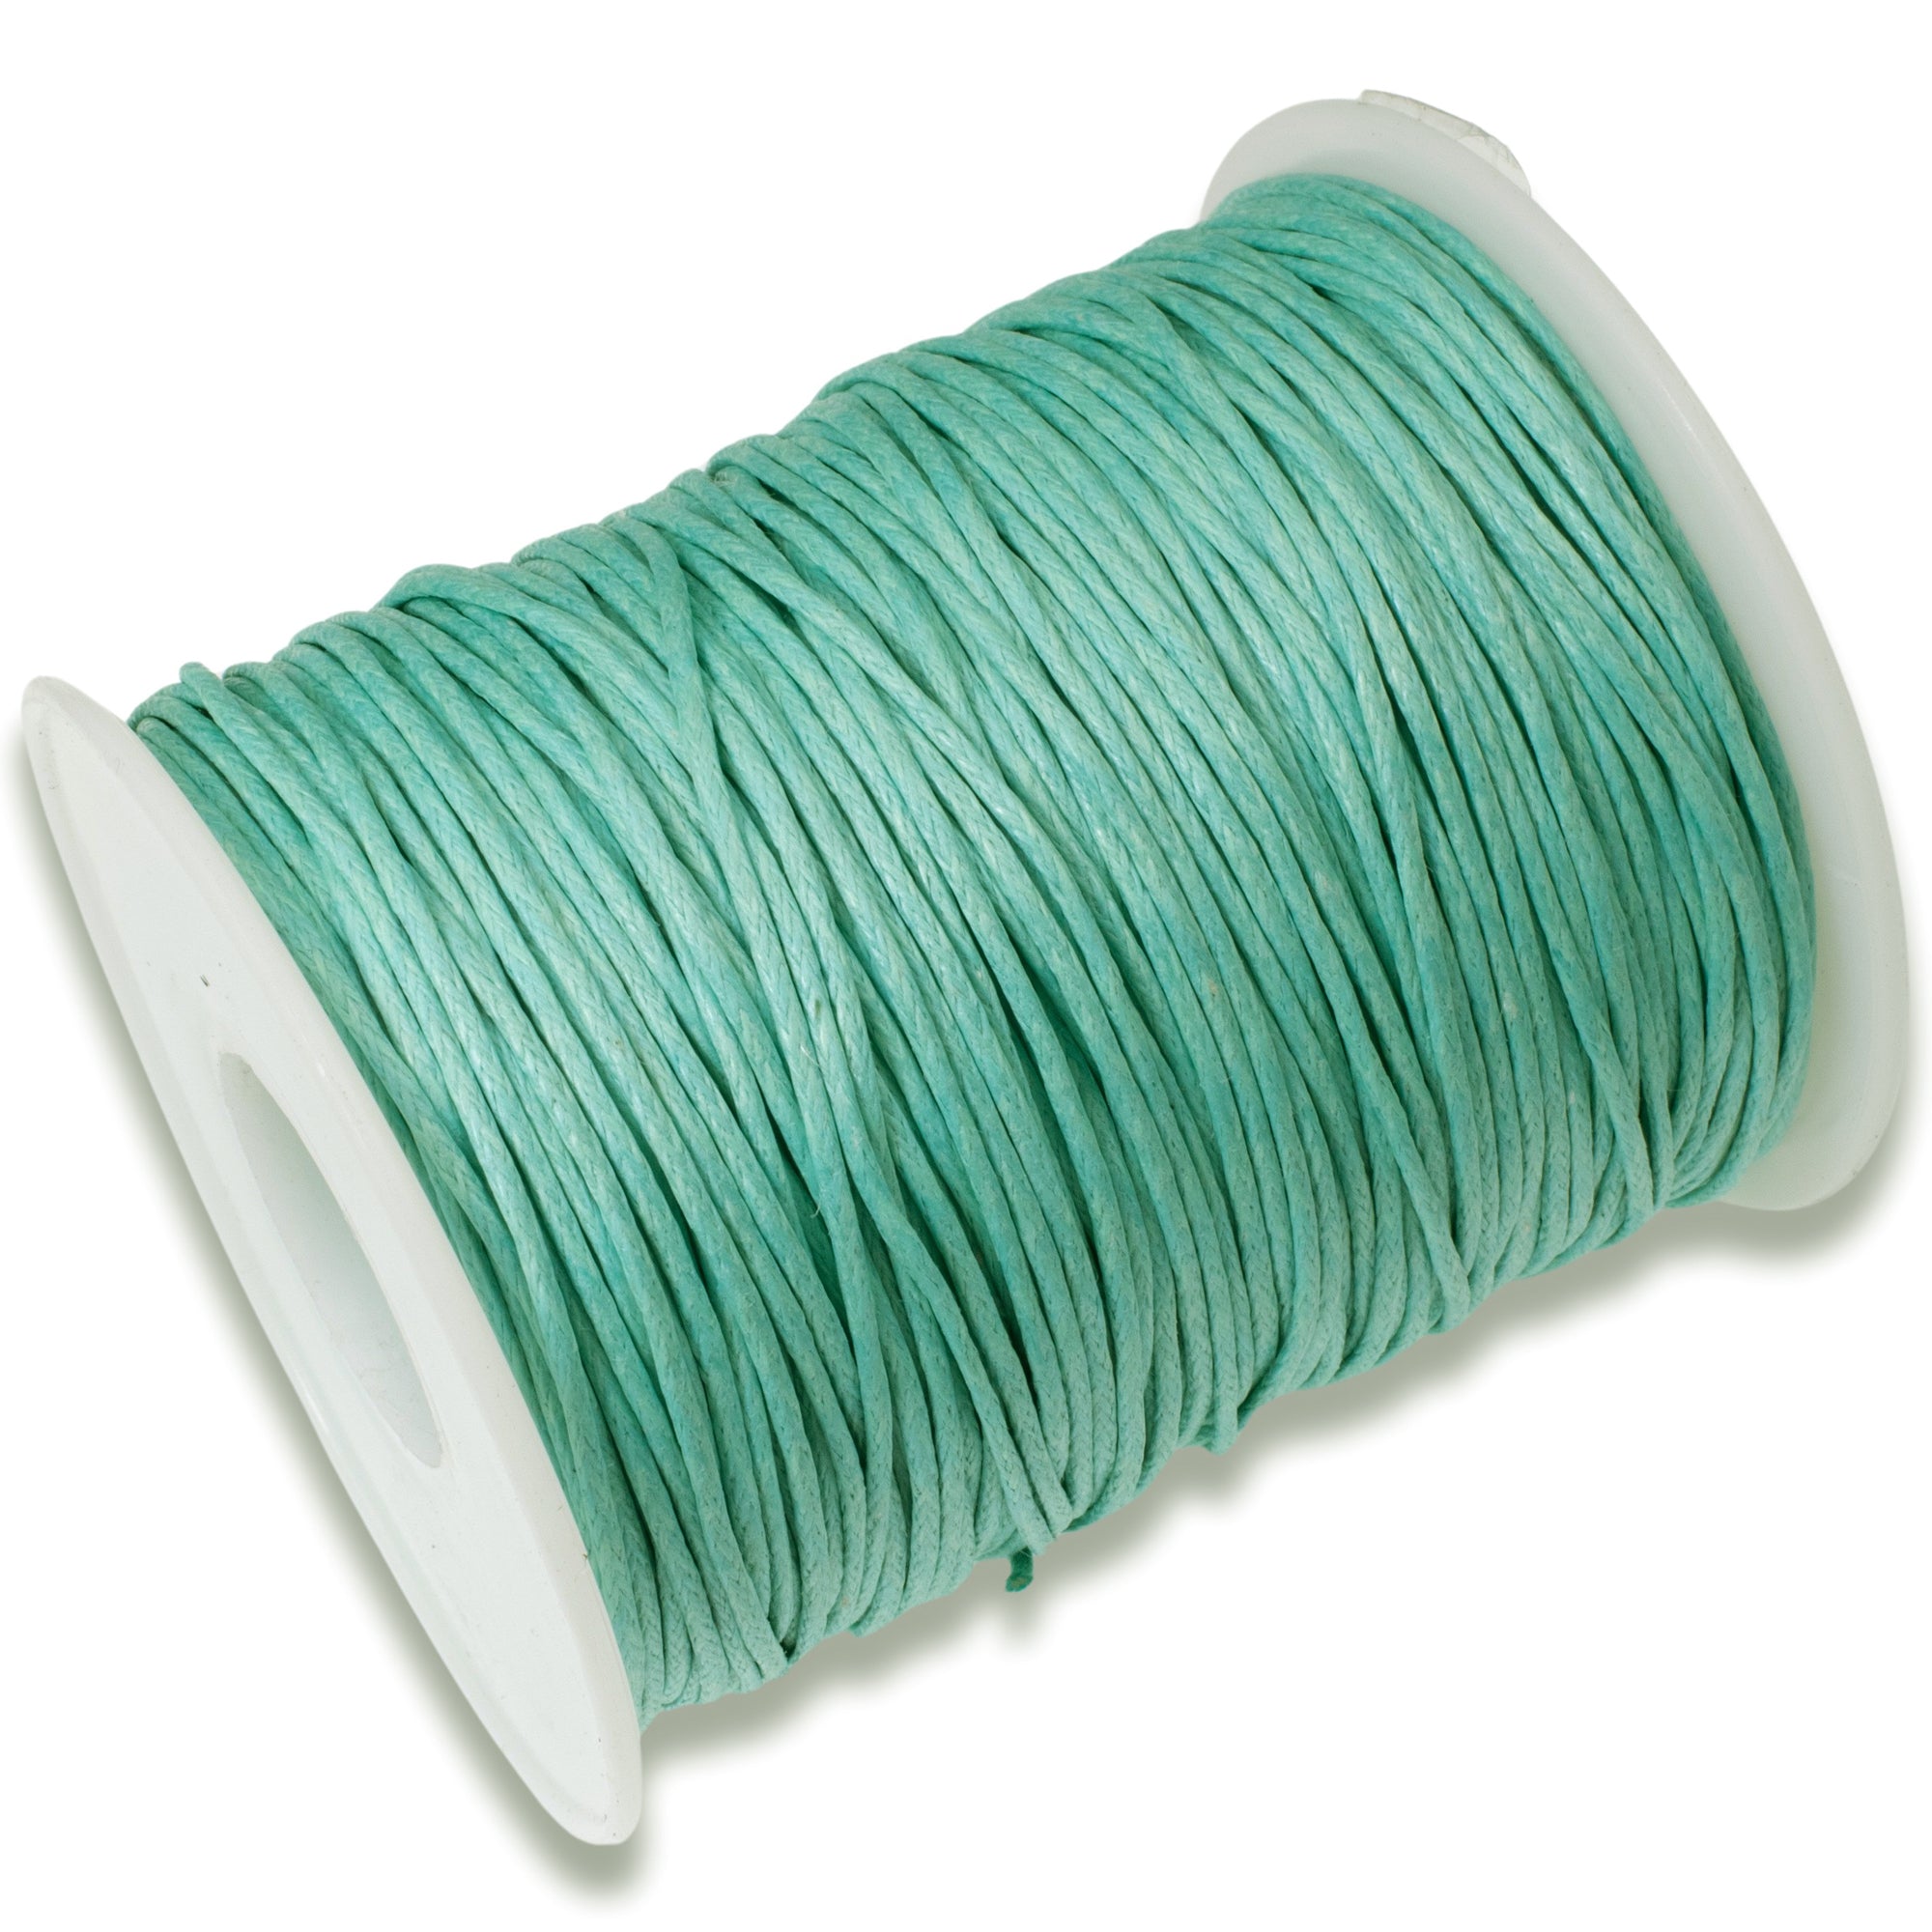 Aqua Green 1mm Waxed Cotton Cord, Ideal for Macramé and Beading